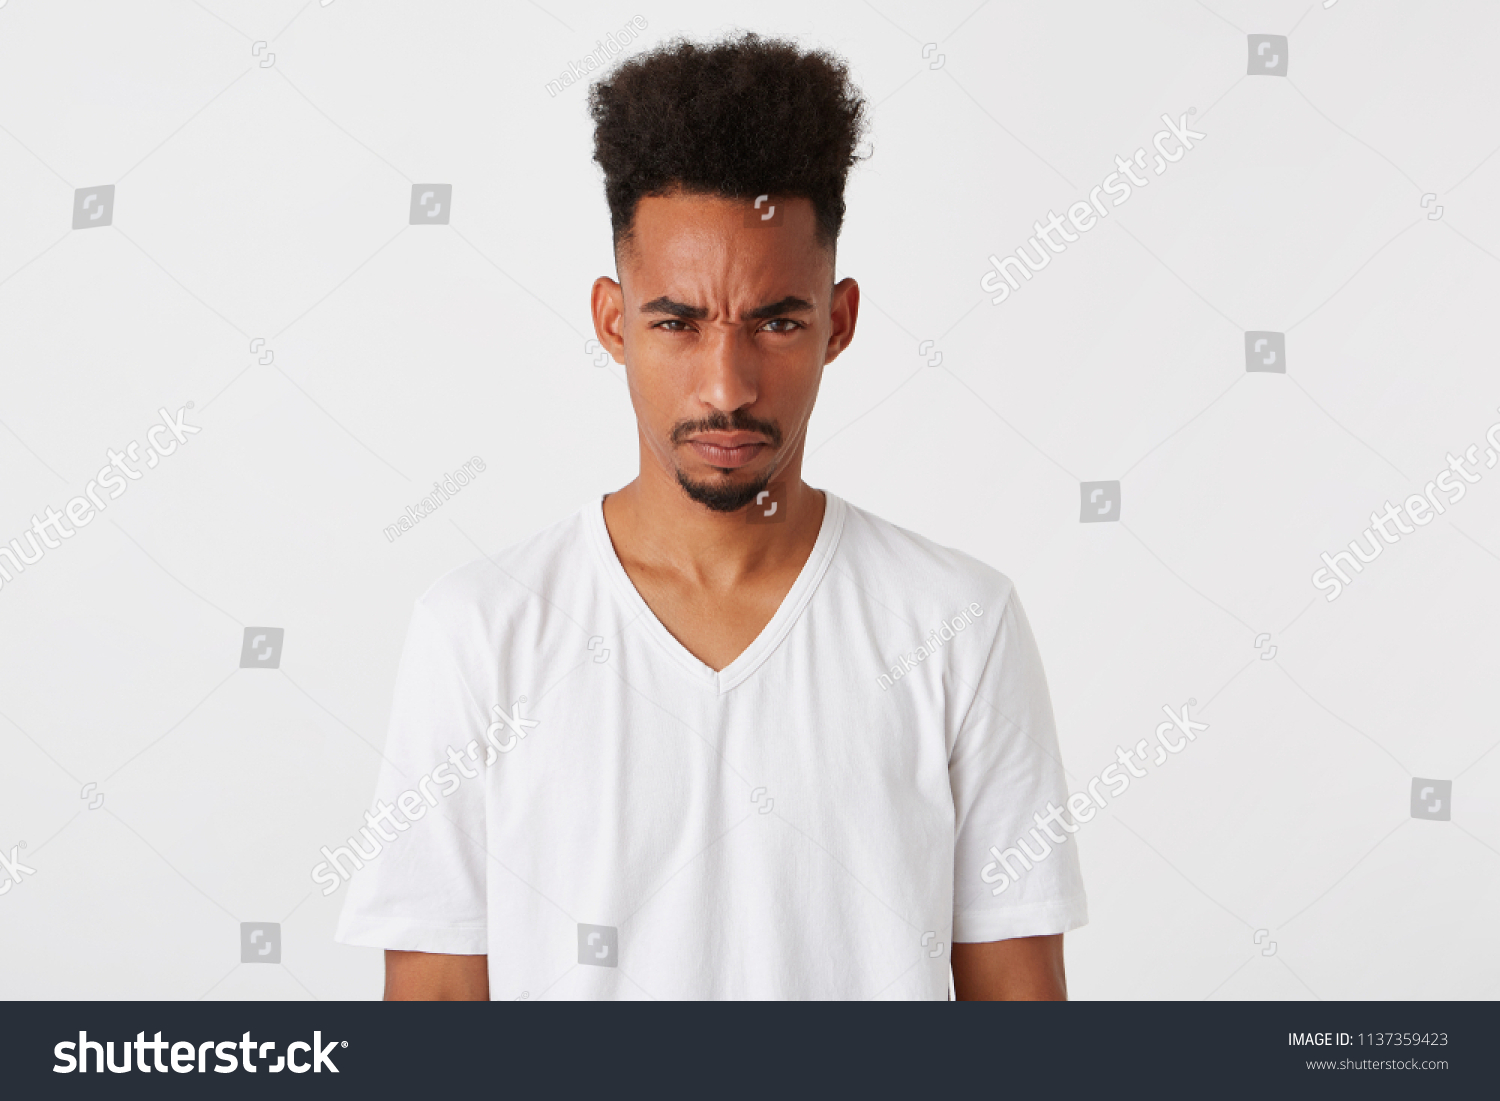 Portrait of mad displesed african american young man with afro hairstyle wears t shirt feels angry and irritated isolated over white background Looks directly in camera #1137359423